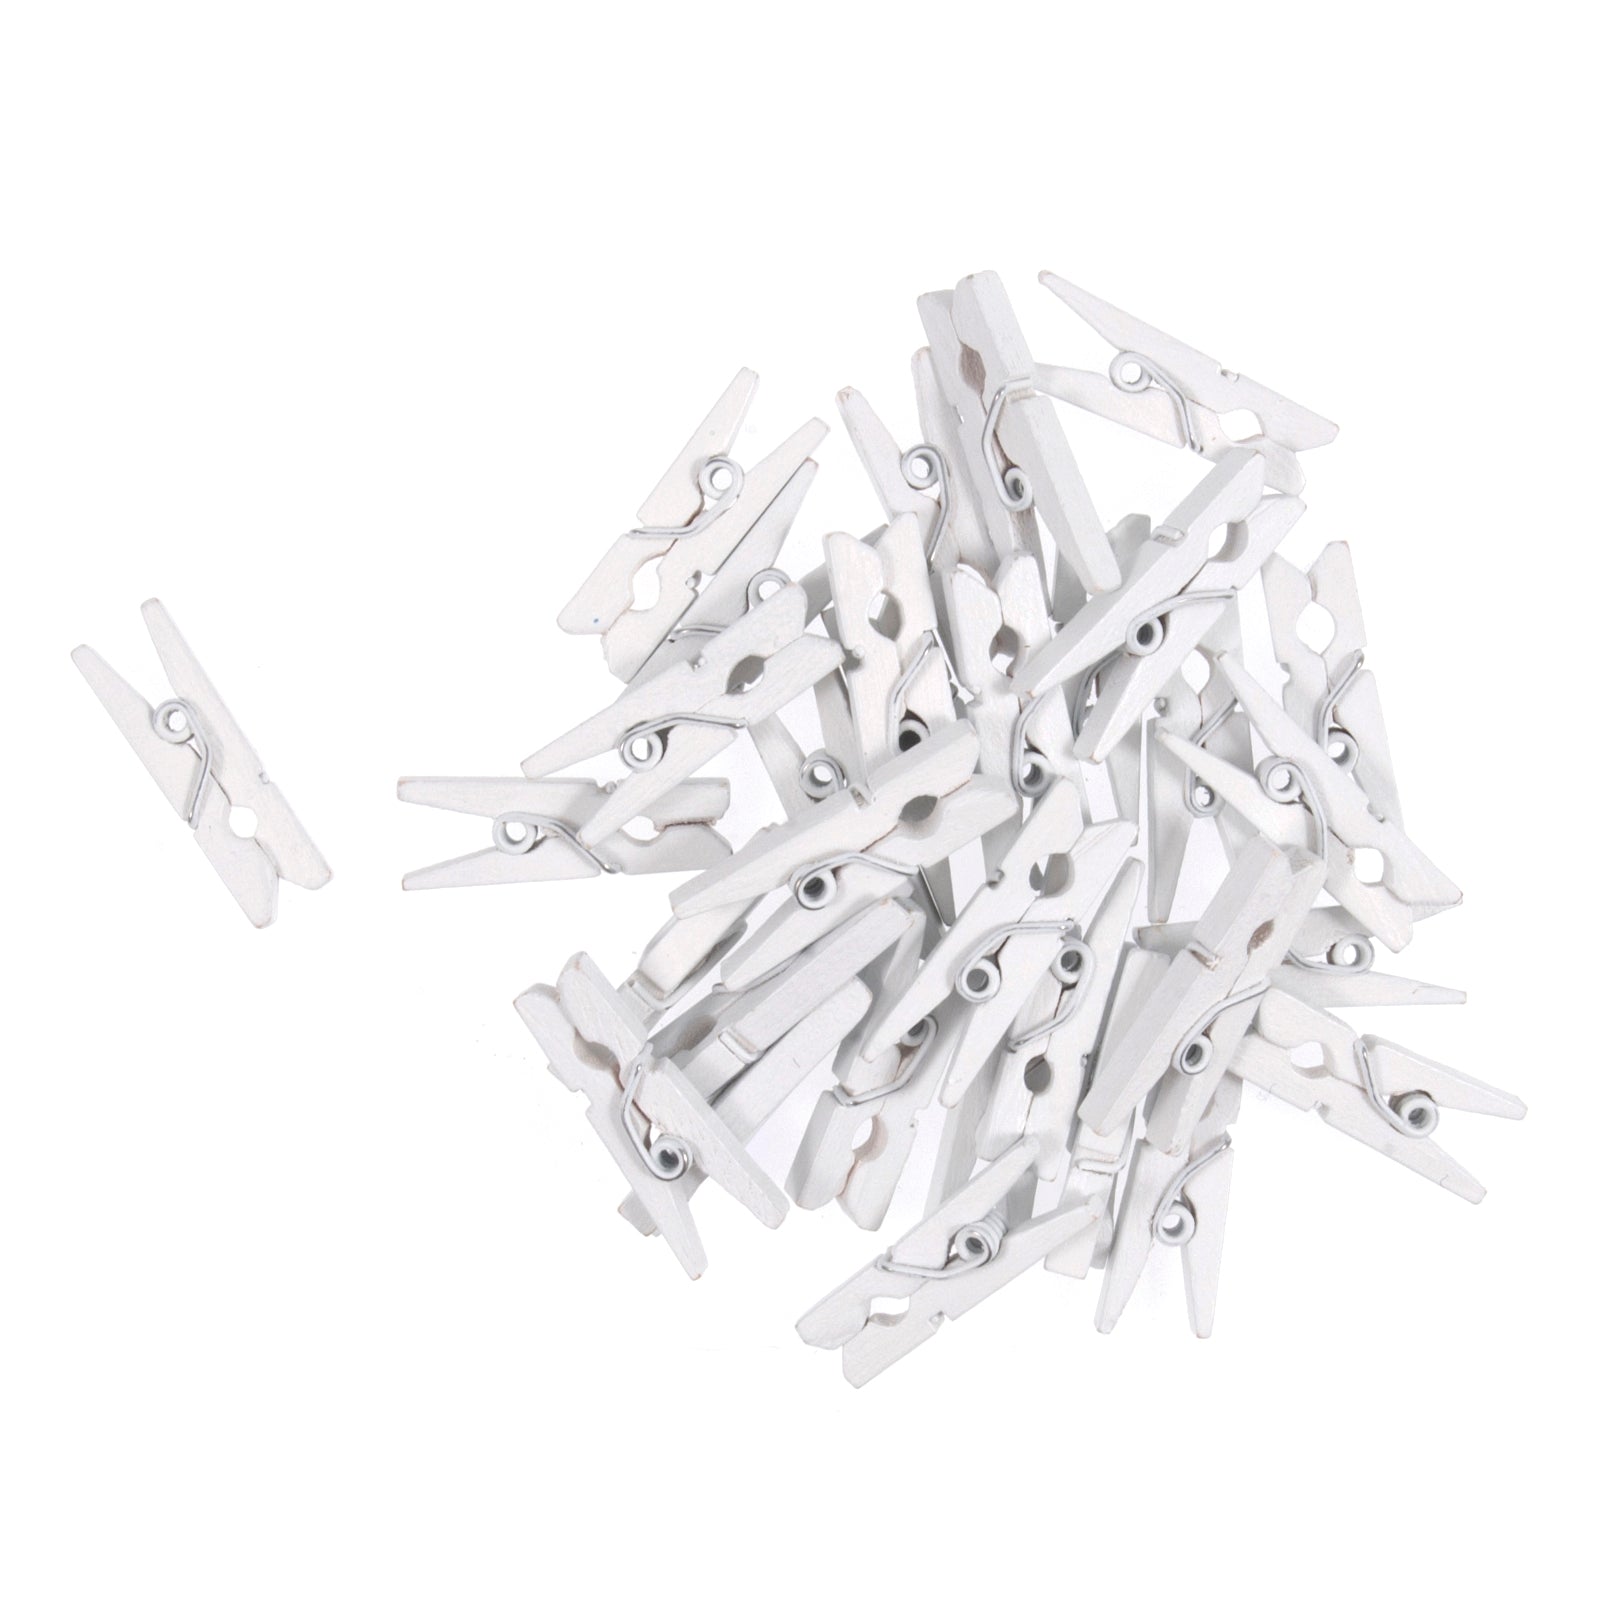 25mm Mini Pegs: Pack of 45